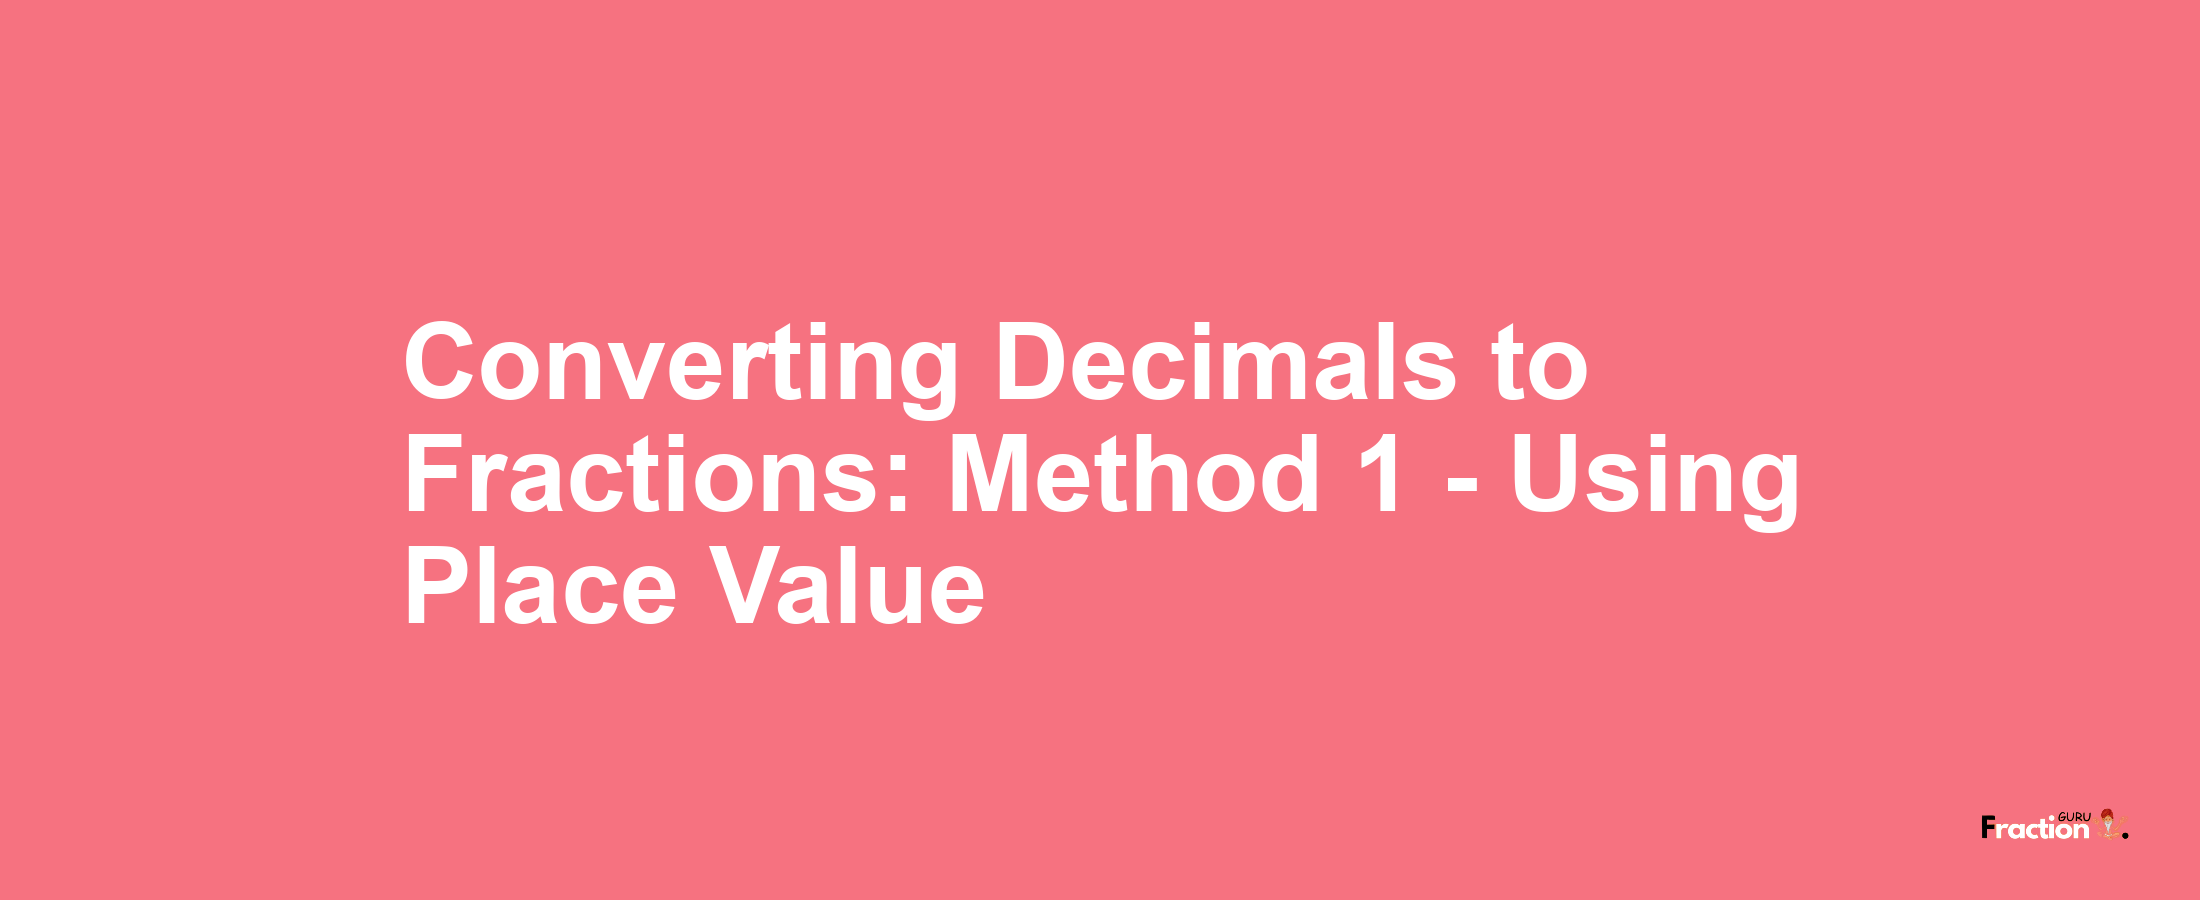 Converting Decimals to Fractions: Method 1 - Using Place Value